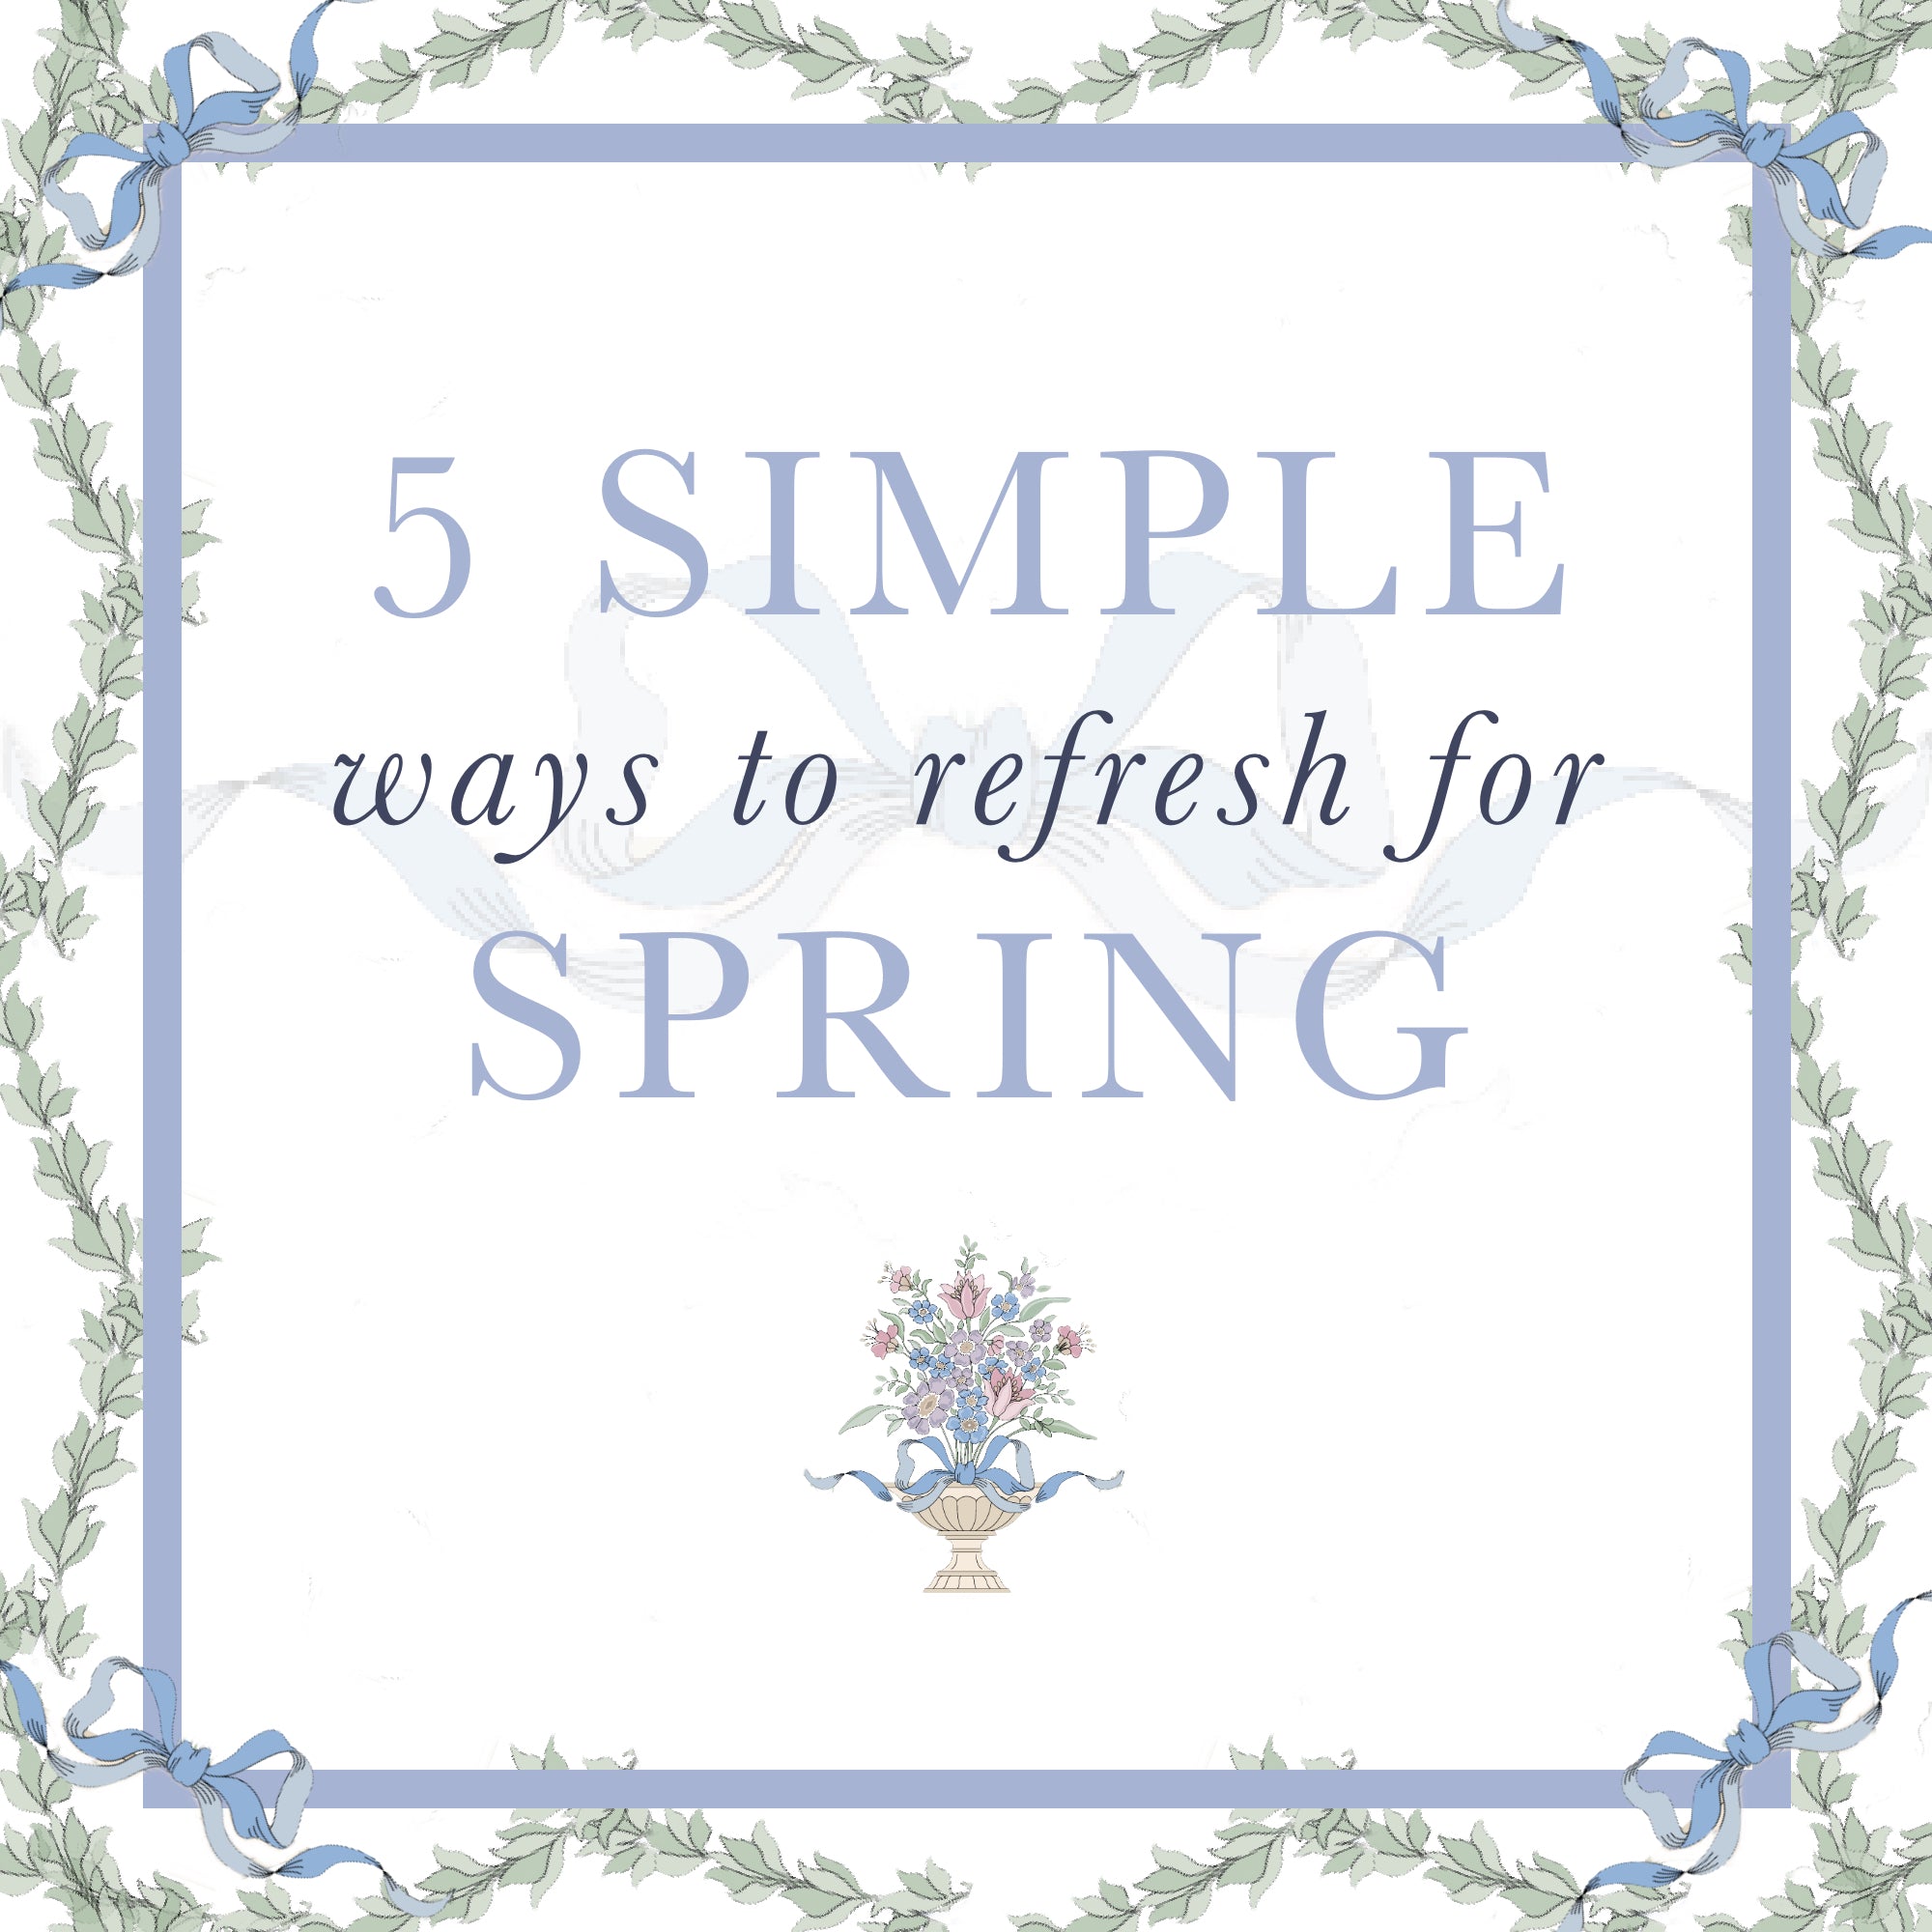 5 Simple Ways to Refresh for Spring